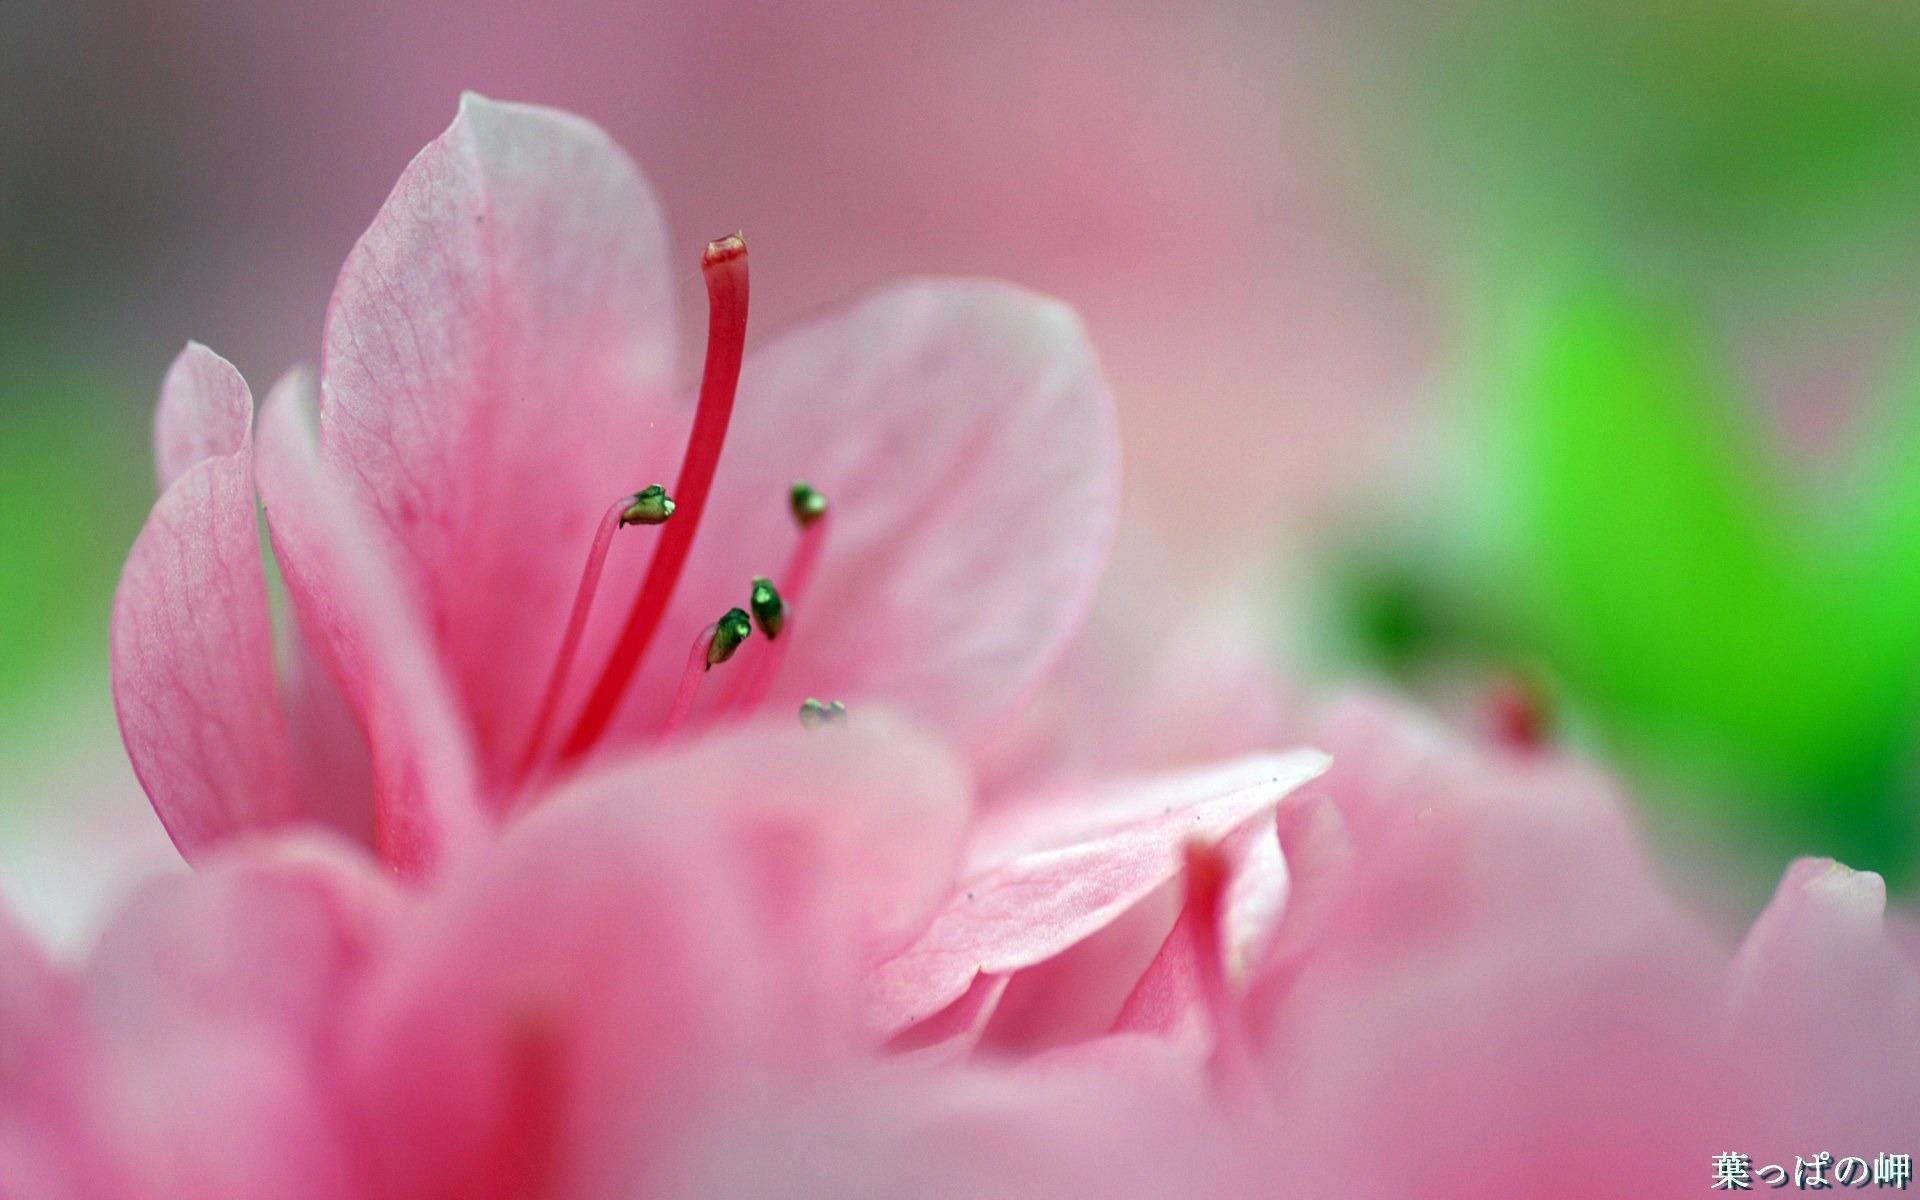 Personal Flowers HD Wallpapers #46 - 1920x1200